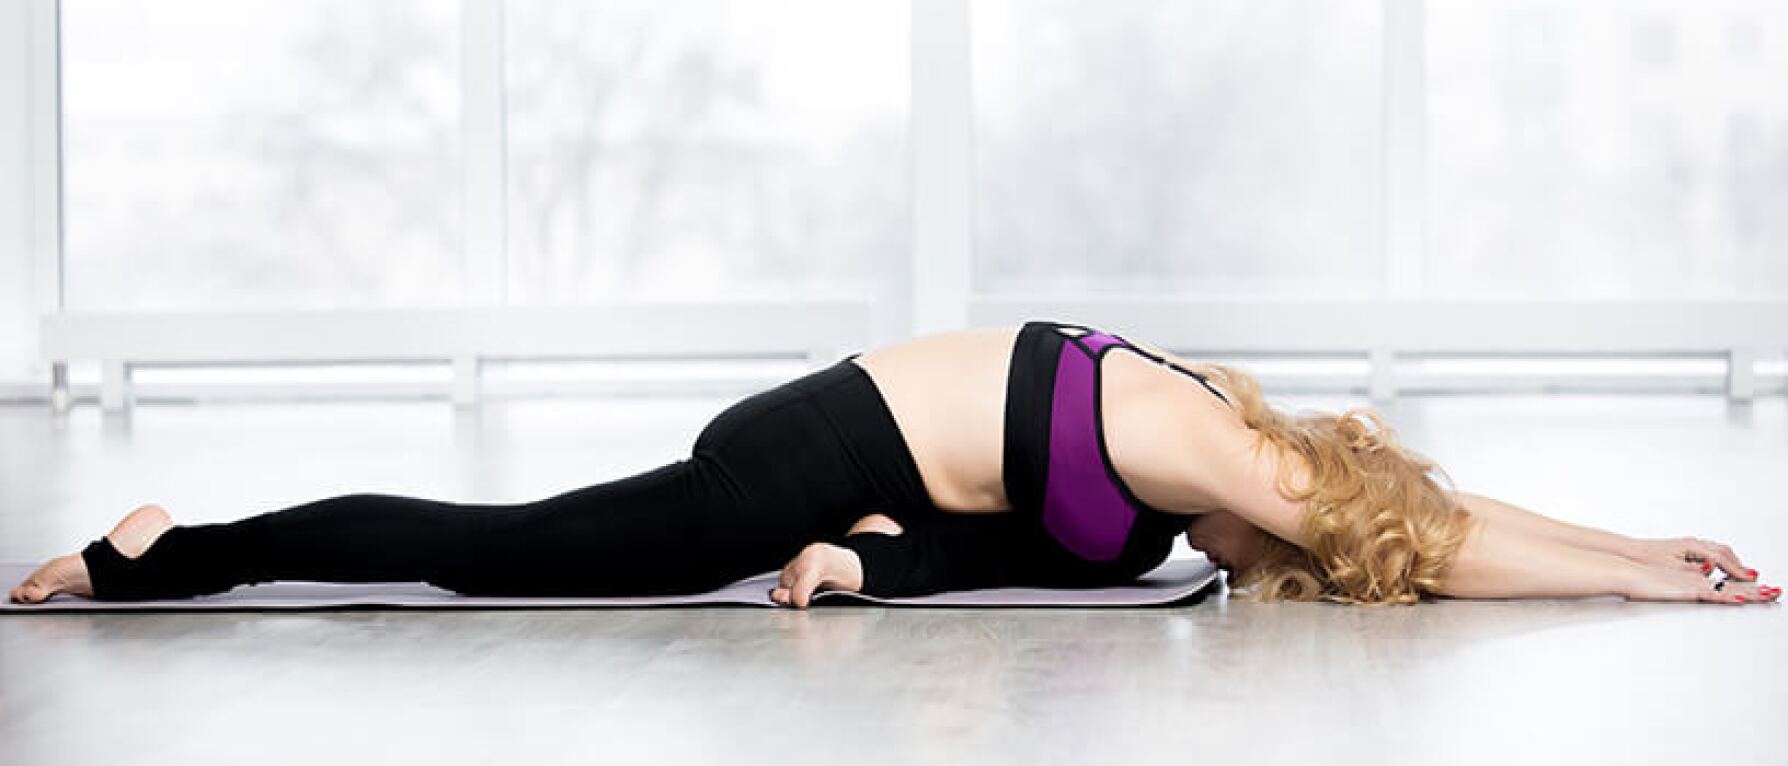 Sluggish at midday? Try Kathryn Budig's 10-minute yoga routine